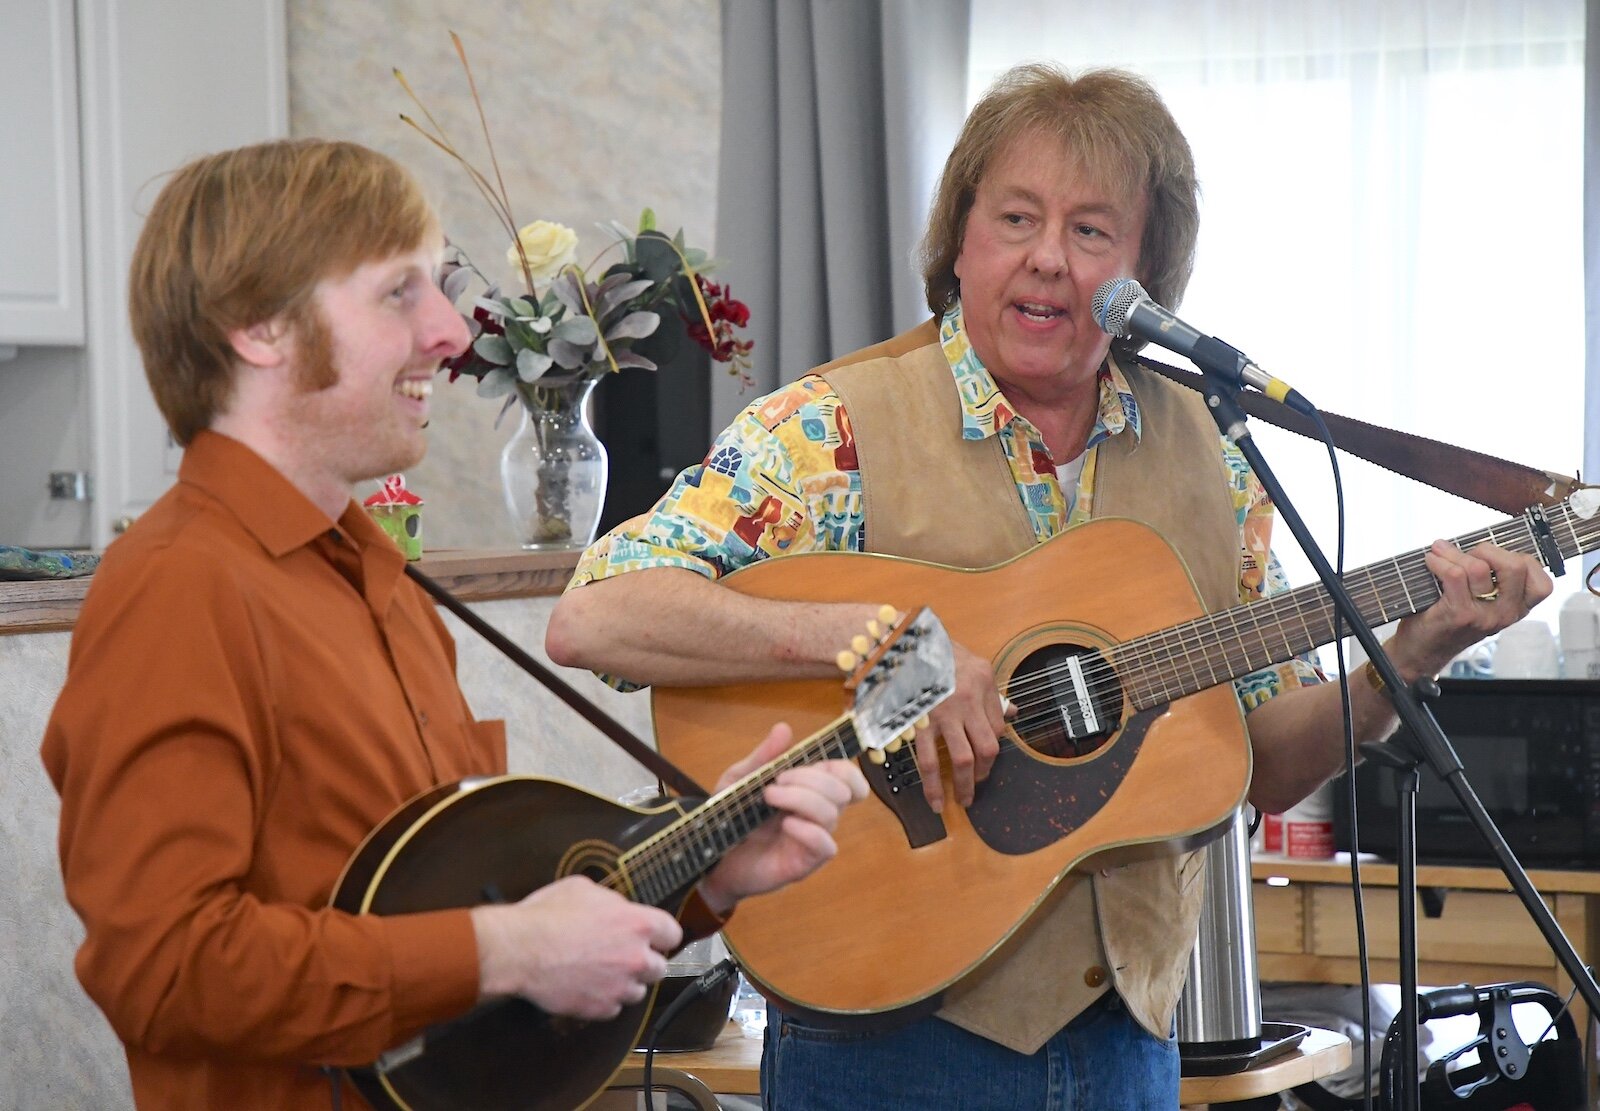 Luke Lenhart, left, and Bob Rowe perform for residents of Park Place Assisted Living in Kalamazoo.